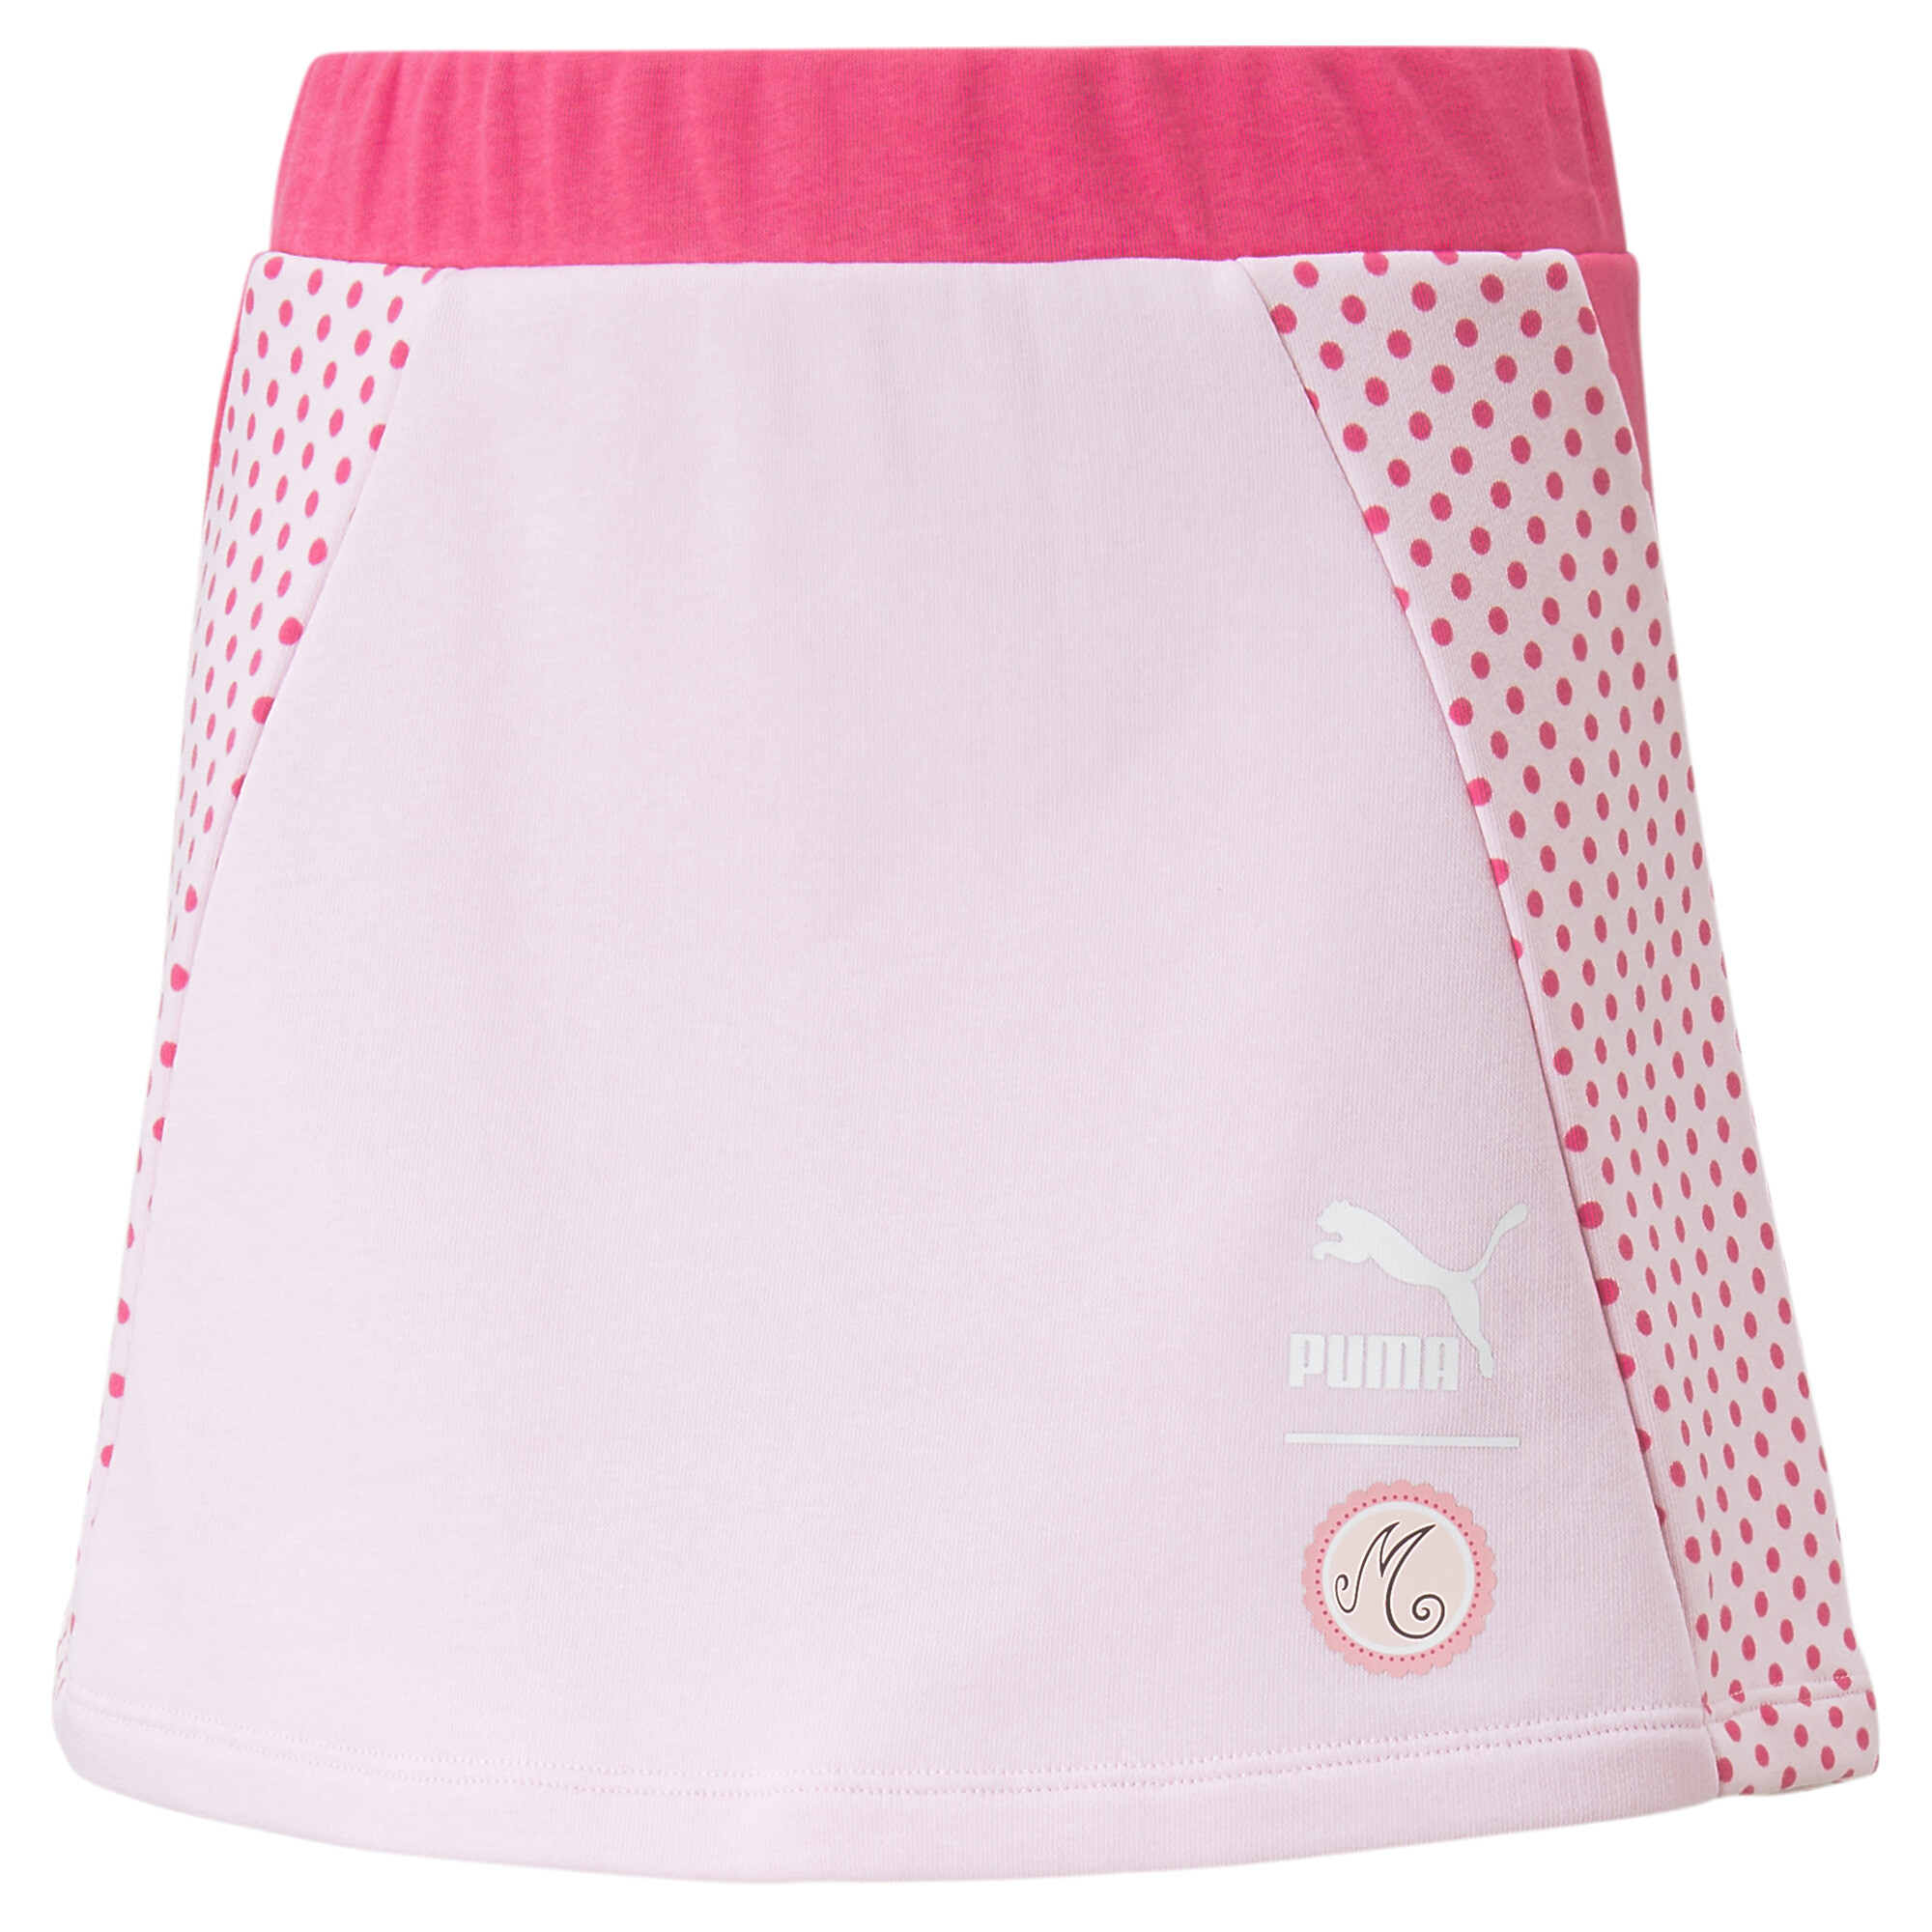 PUMA X MIRACULOUS Skirt In Pink, Size 11-12 Youth